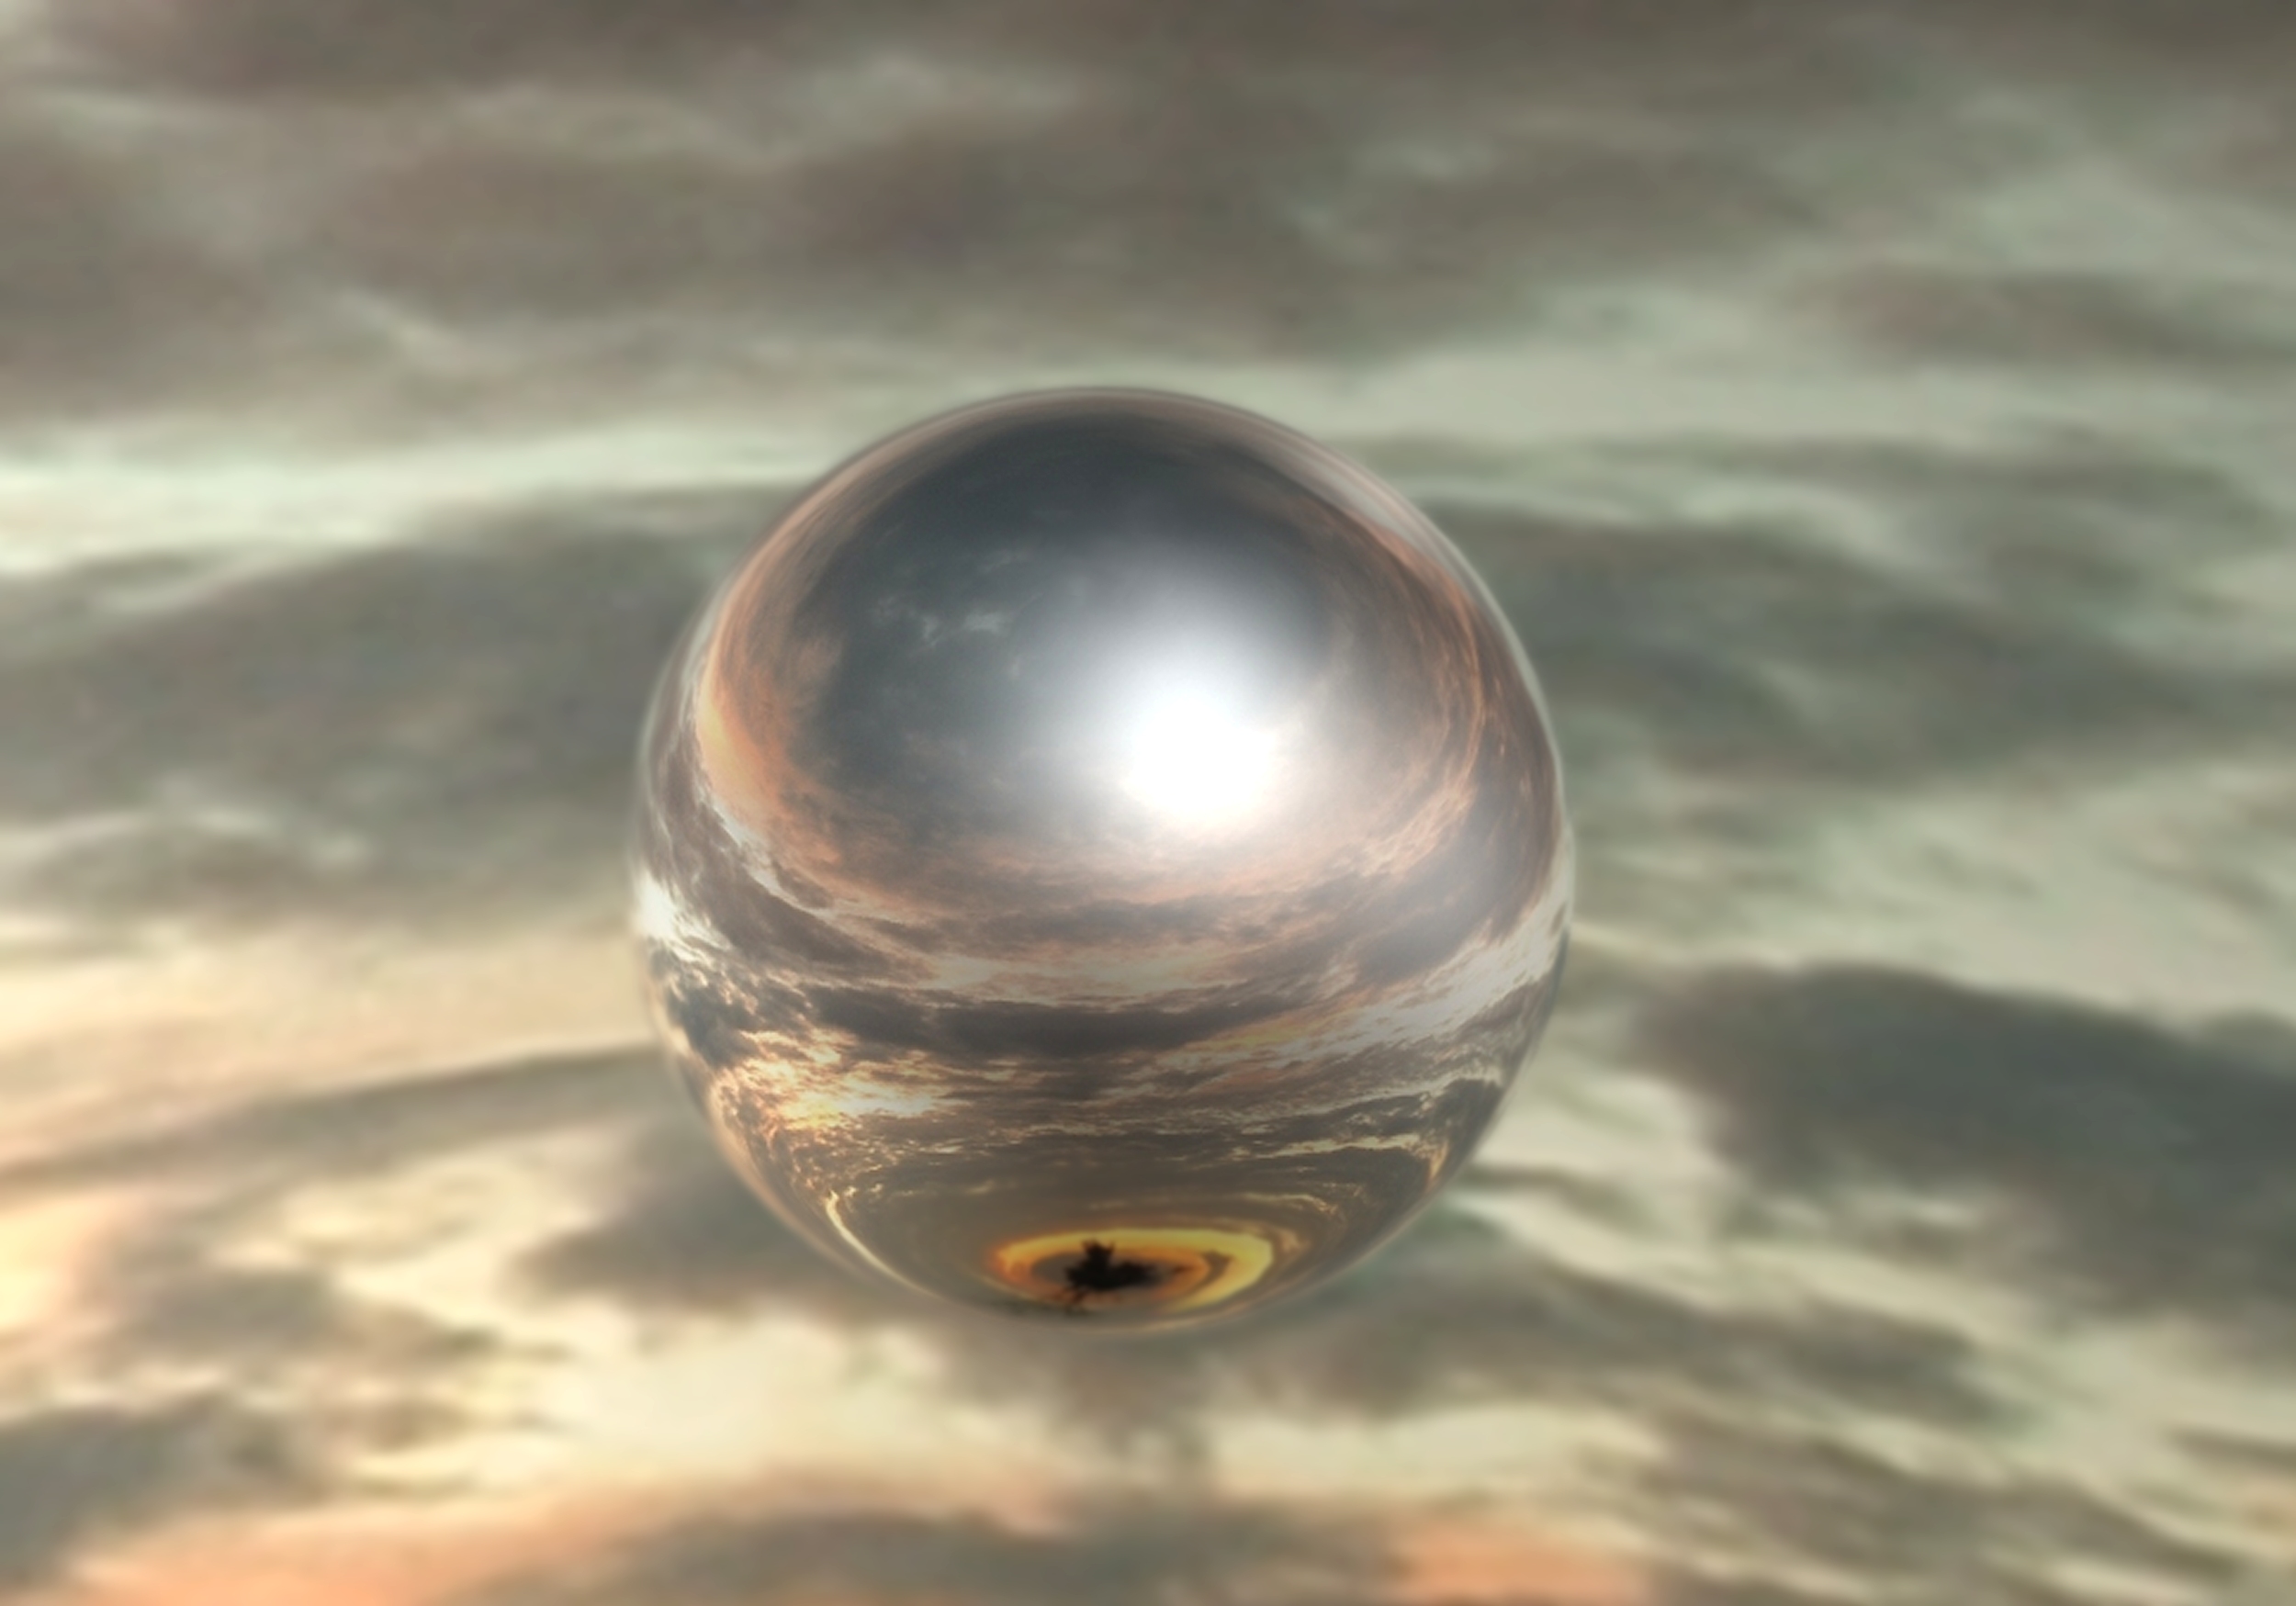 An illustration of a sphere-like UFO. Depositphotos.